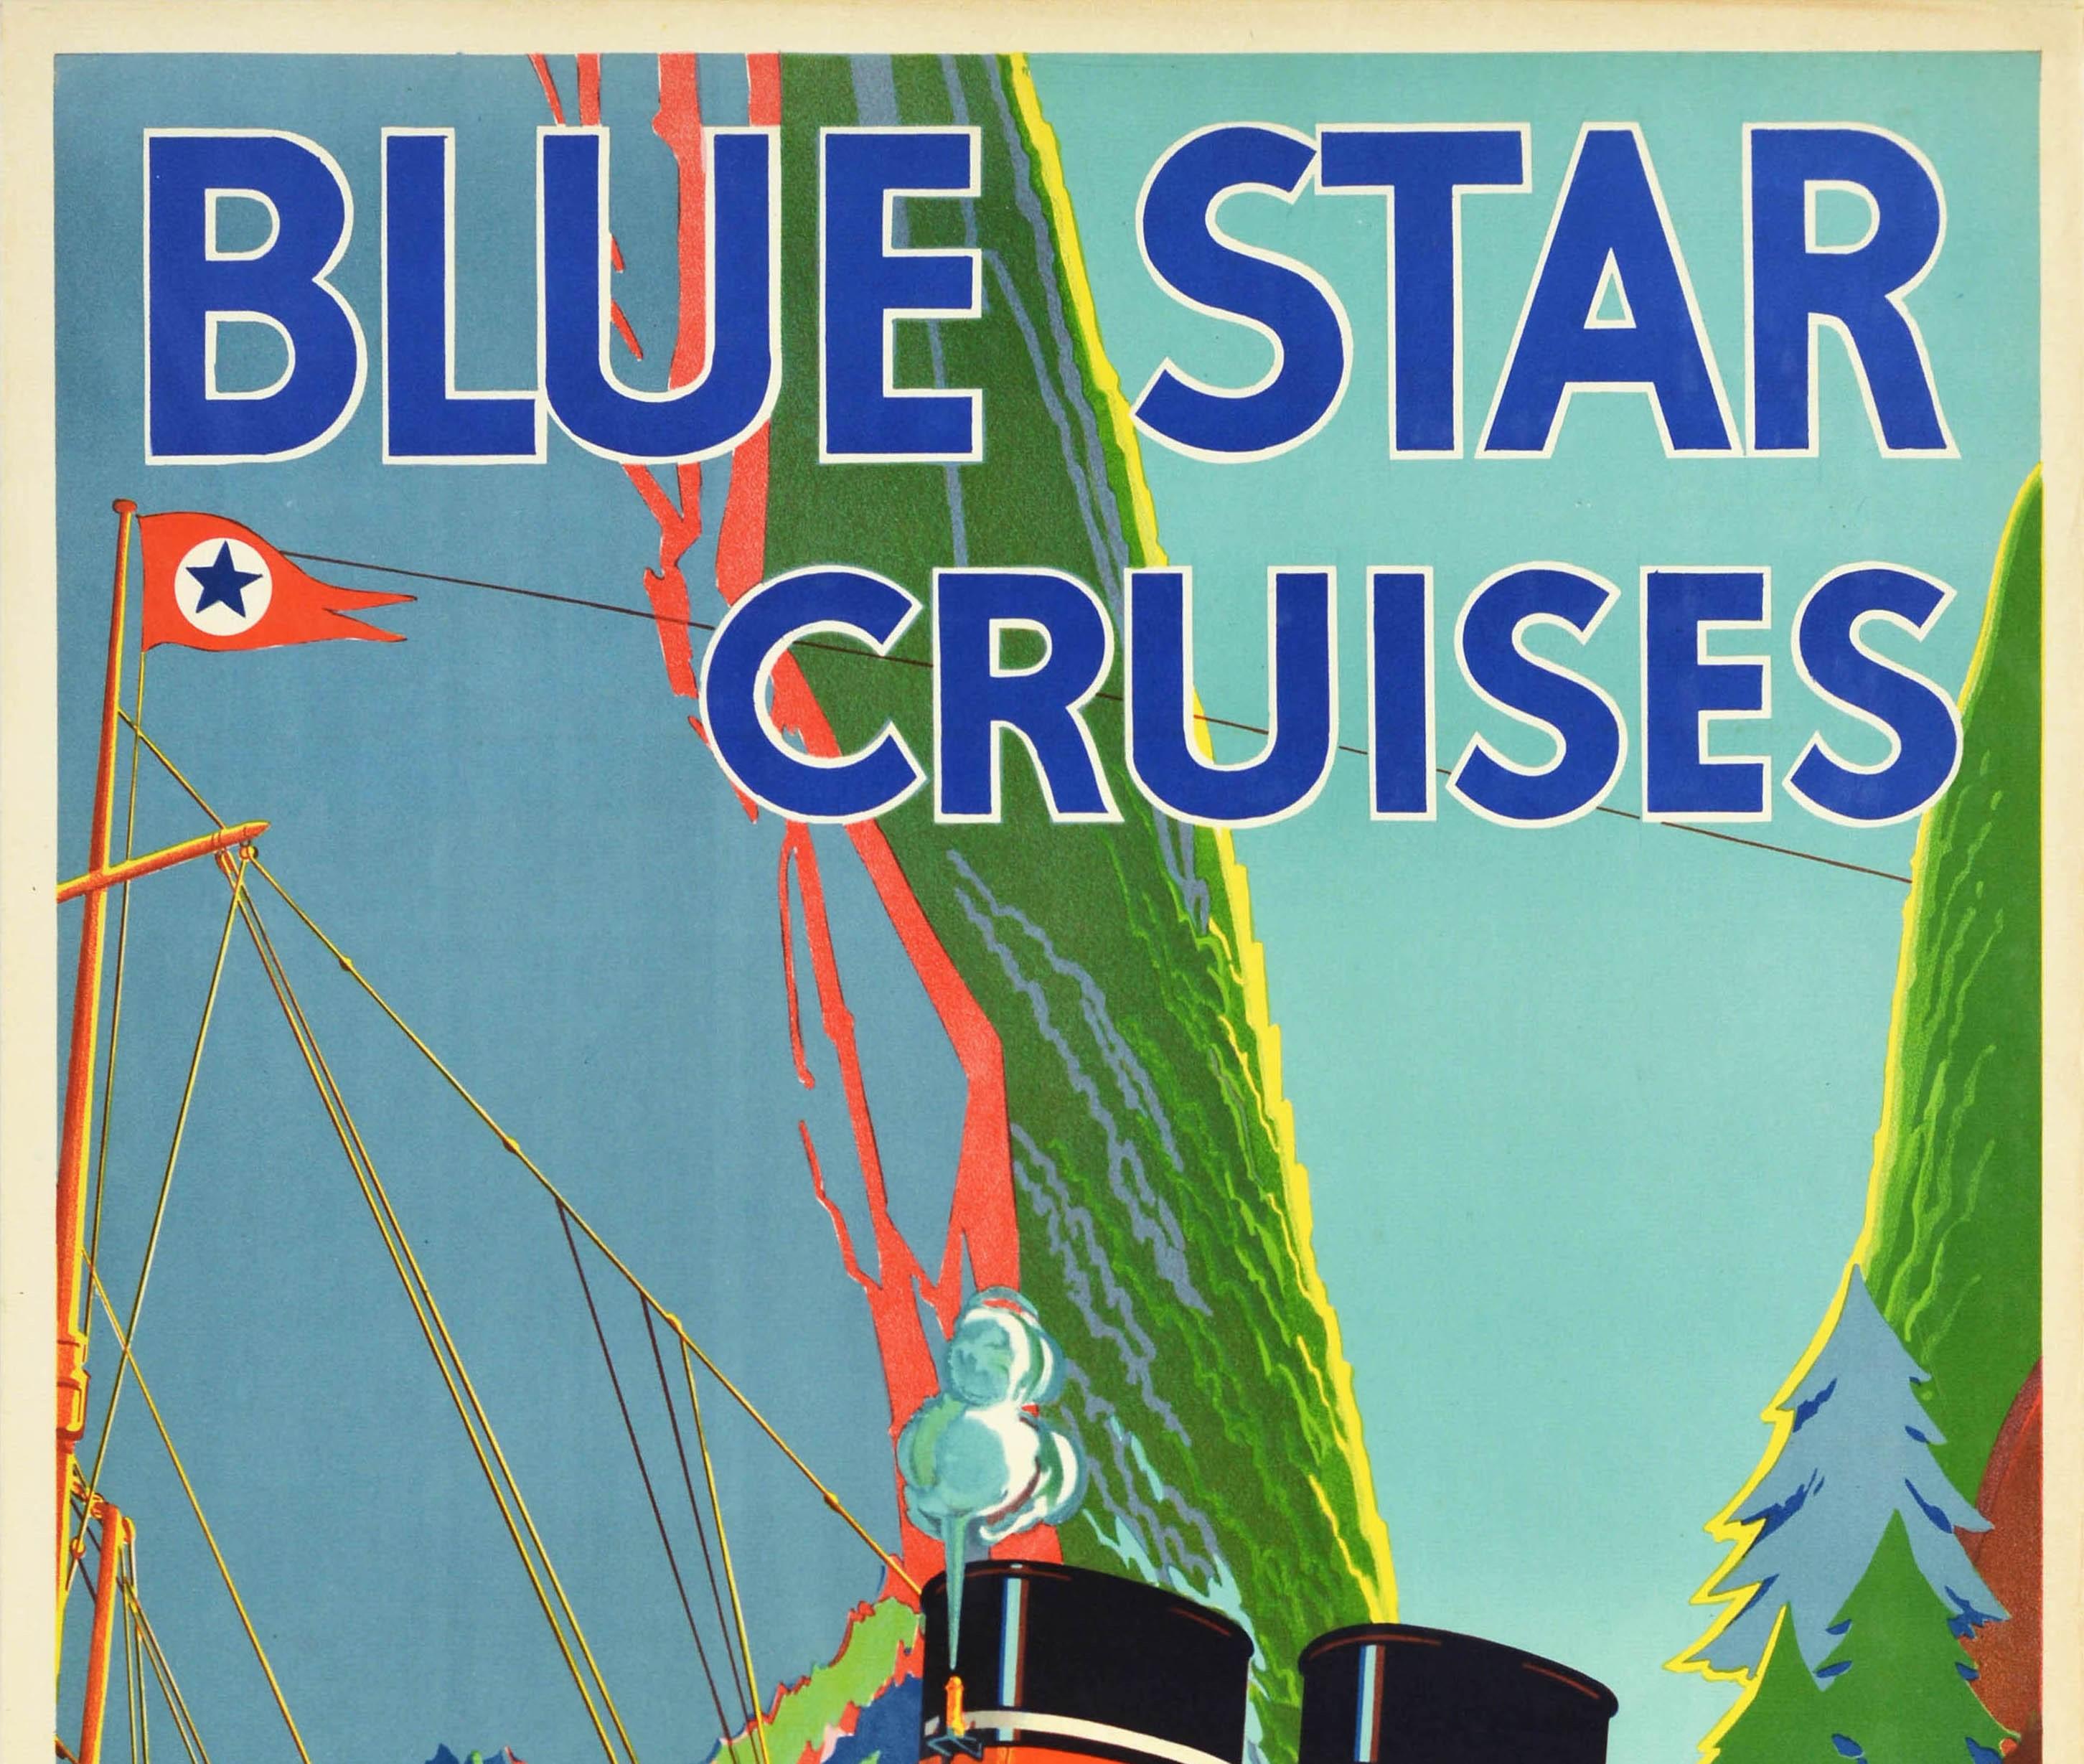 Original vintage cruise travel poster for Blue Star Cruises Norway featuring a colourful image of a ship sailing through a fjord between steep cliffs with trees in the foreground, the passengers enjoying the scenic view from the decks, the bold text